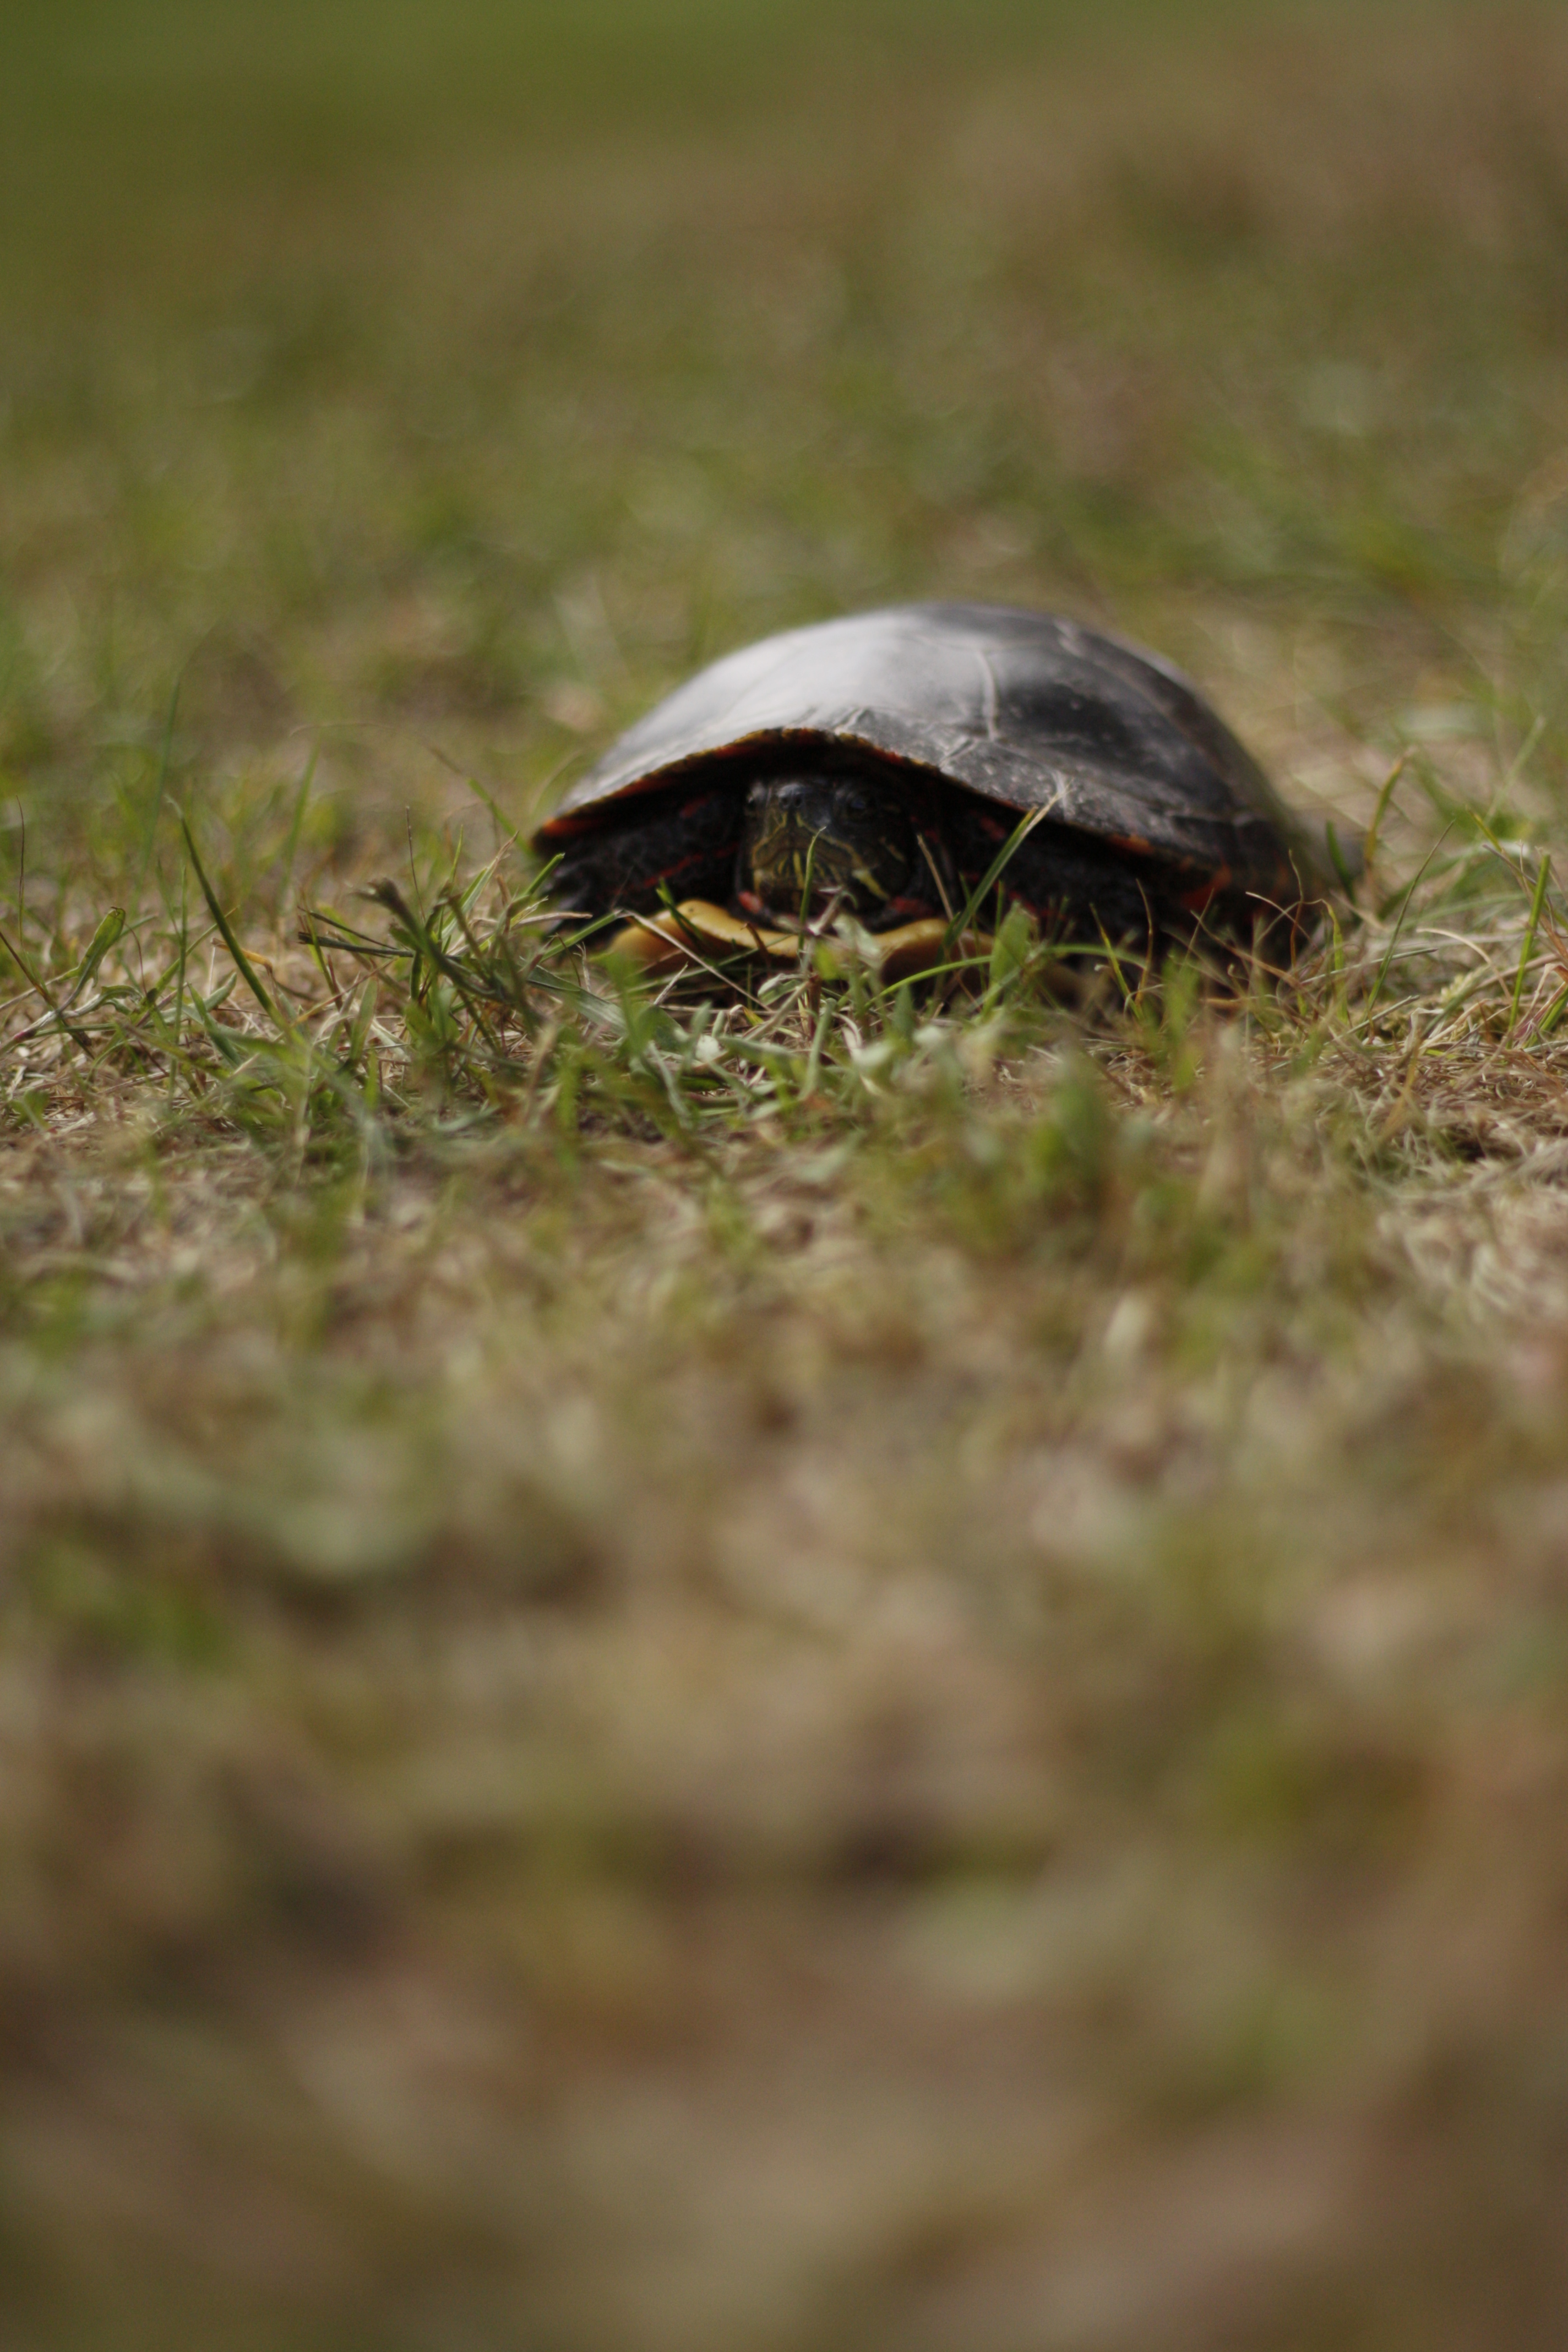 A turtle walking through the base camp. We named him Charlie.